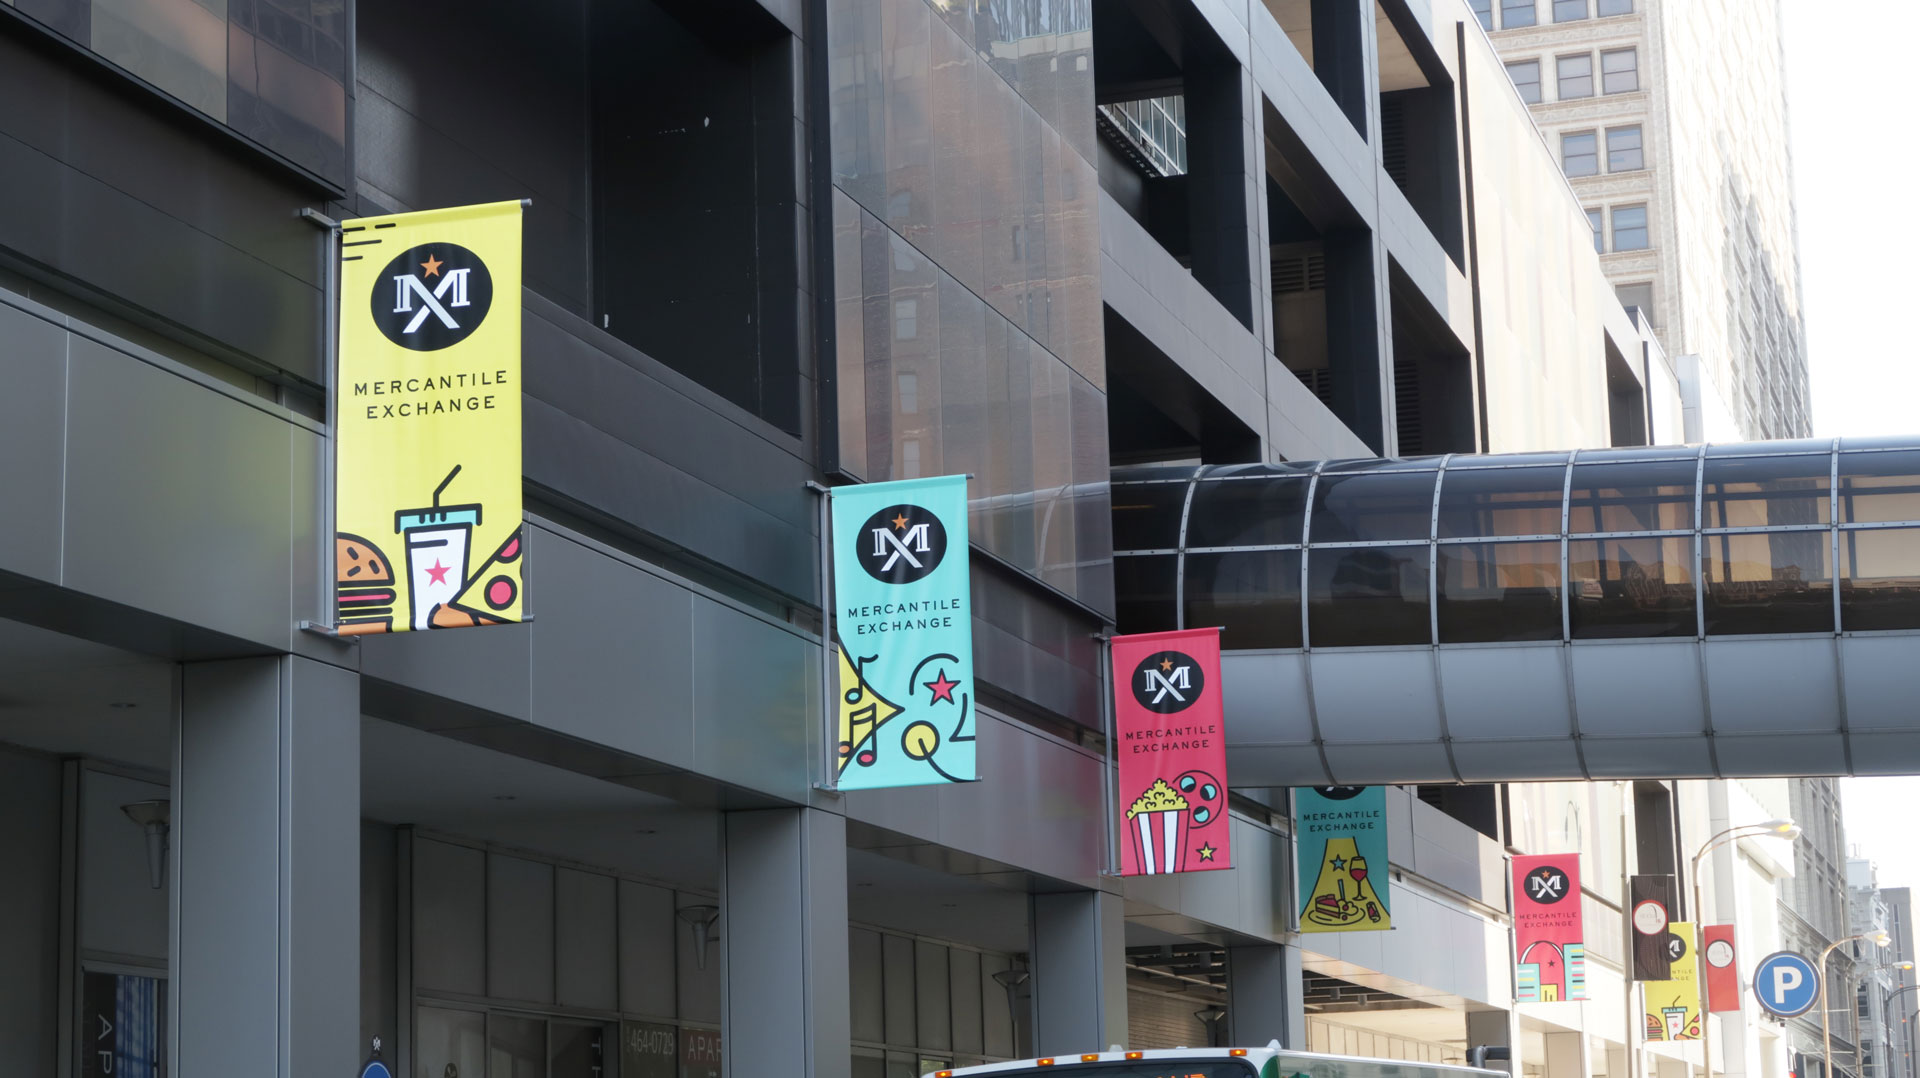 The banners we designed for the MX Exchange line the streets of downtown St. Louis